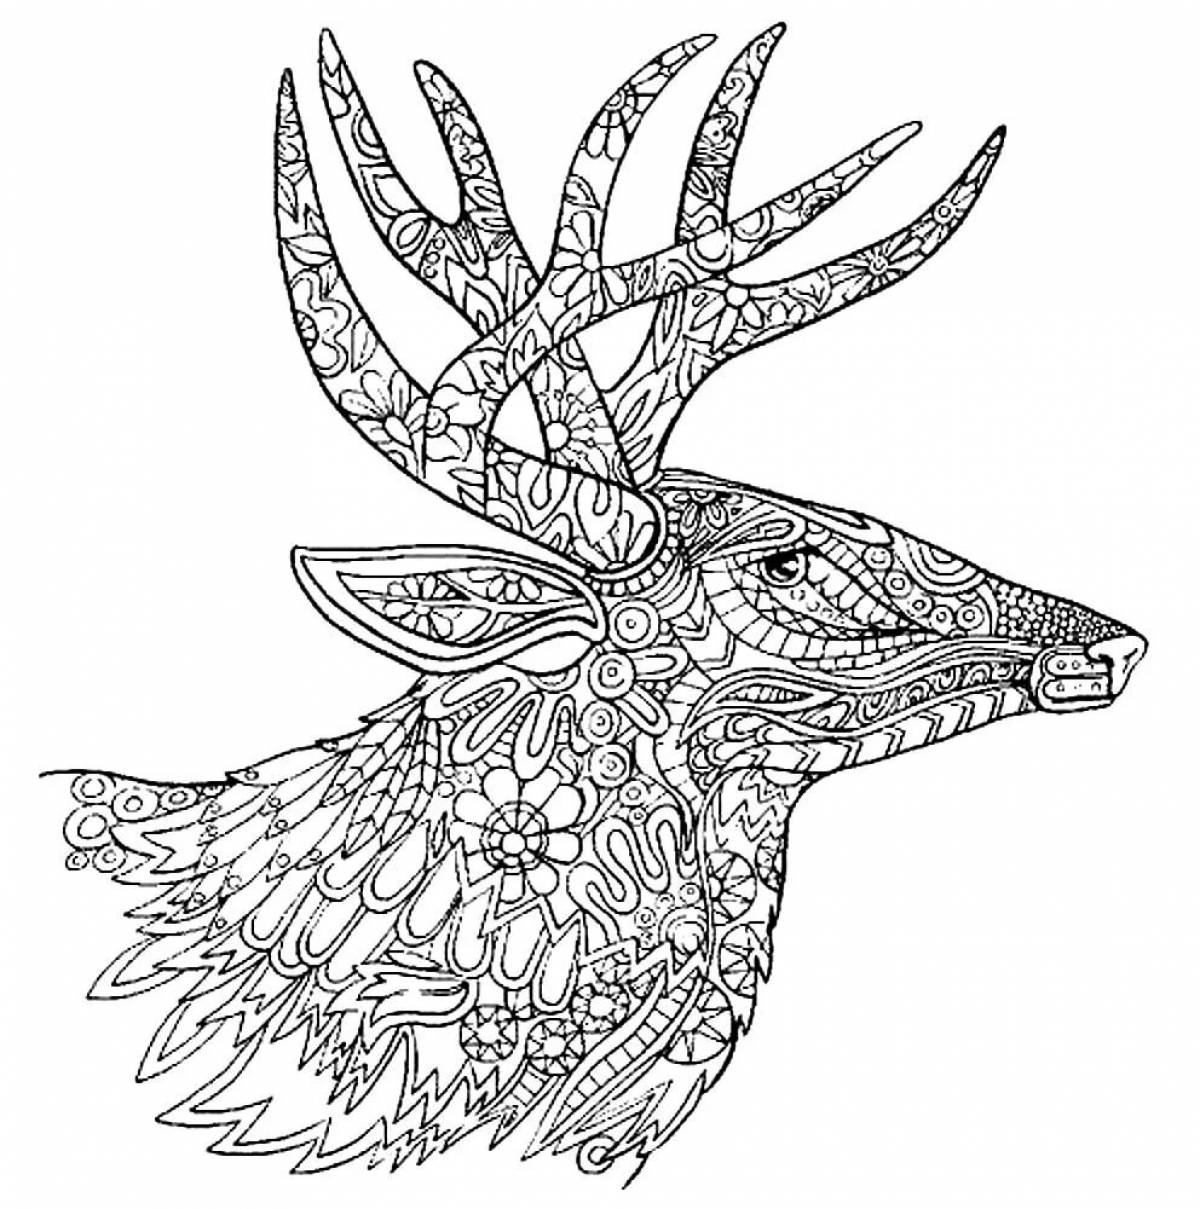 Coloring page blissful antistress animal complex